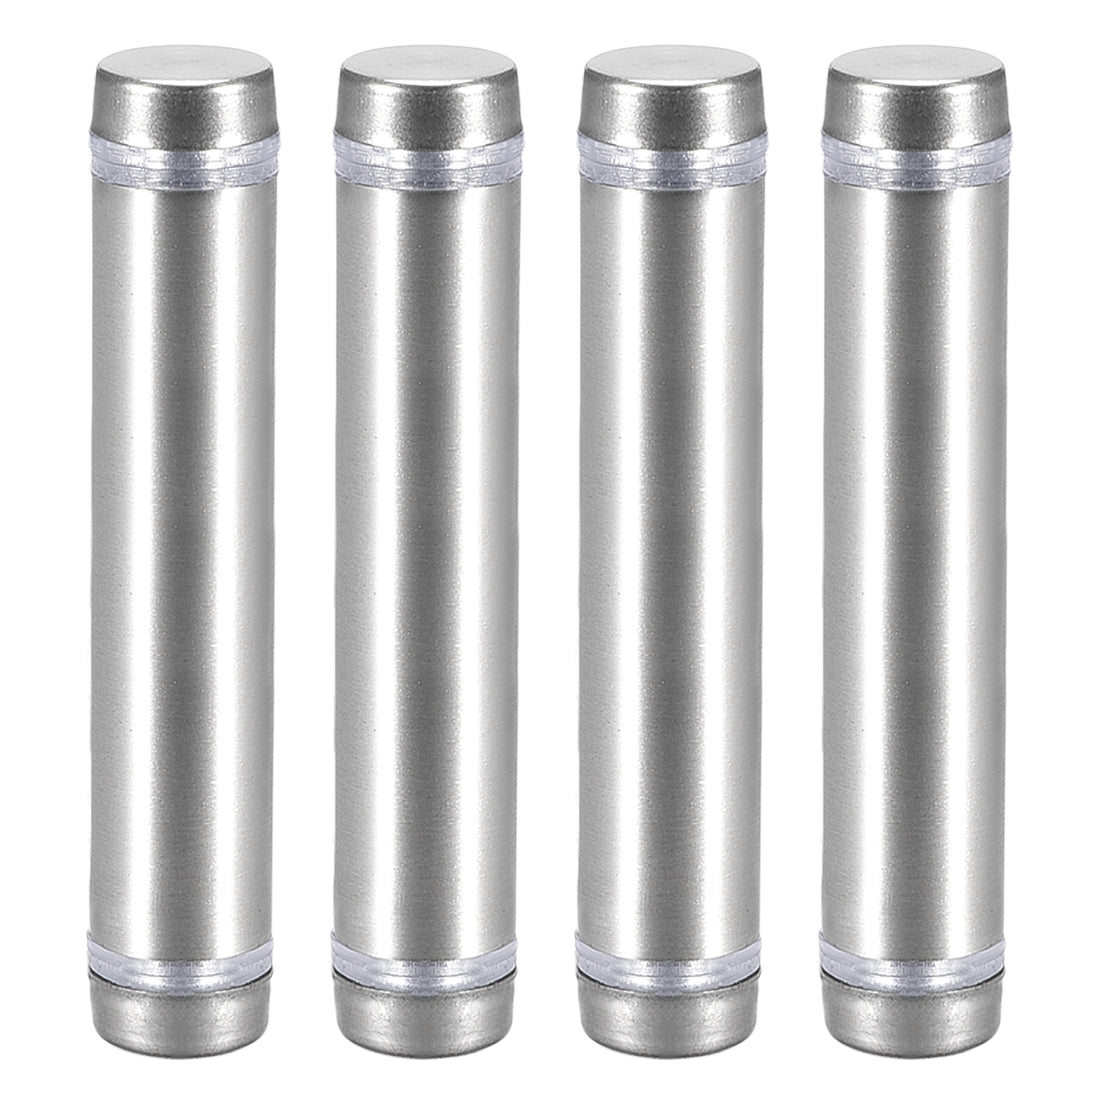 uxcell Uxcell Glass Standoff Double Head Stainless Steel Standoff Holder 12mm x 64mm 4 Pcs